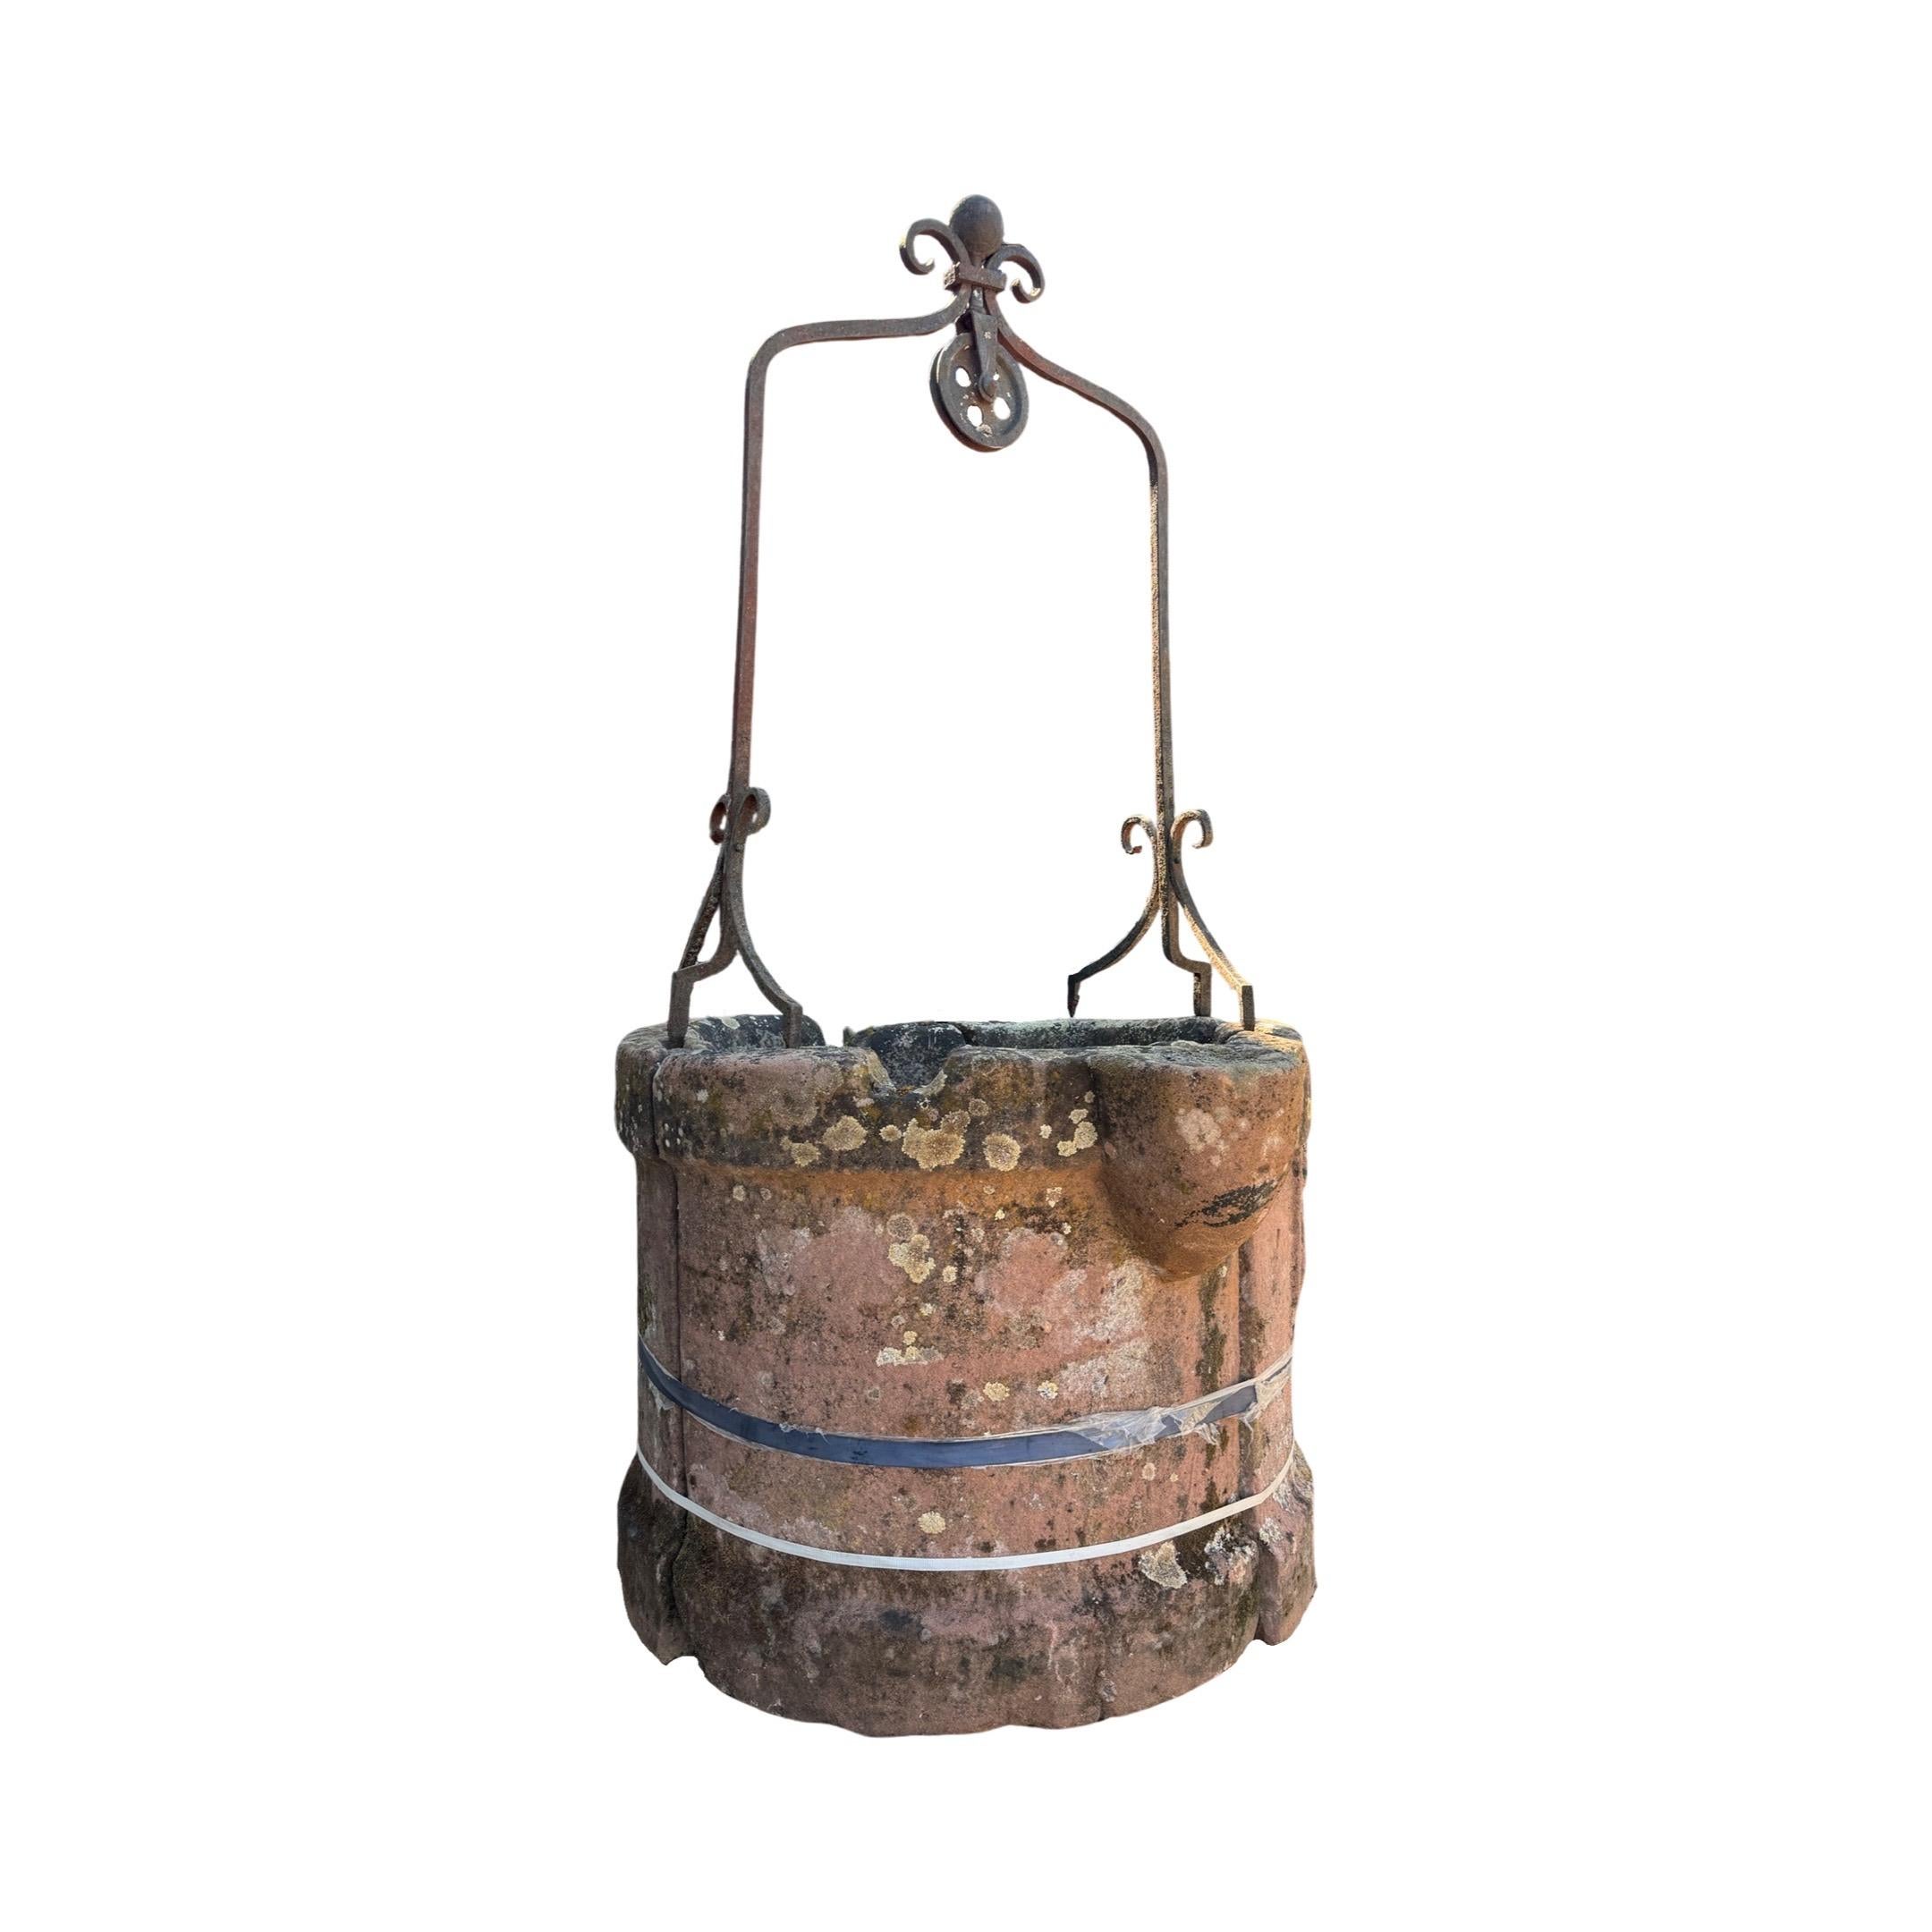 This unique 16th-century Northern Italian well features an impressive limestone base and an iron-top structure. It also includes a stunning carved coat of arms symbol engraved on its outside wall, making it a perfect statement piece for any